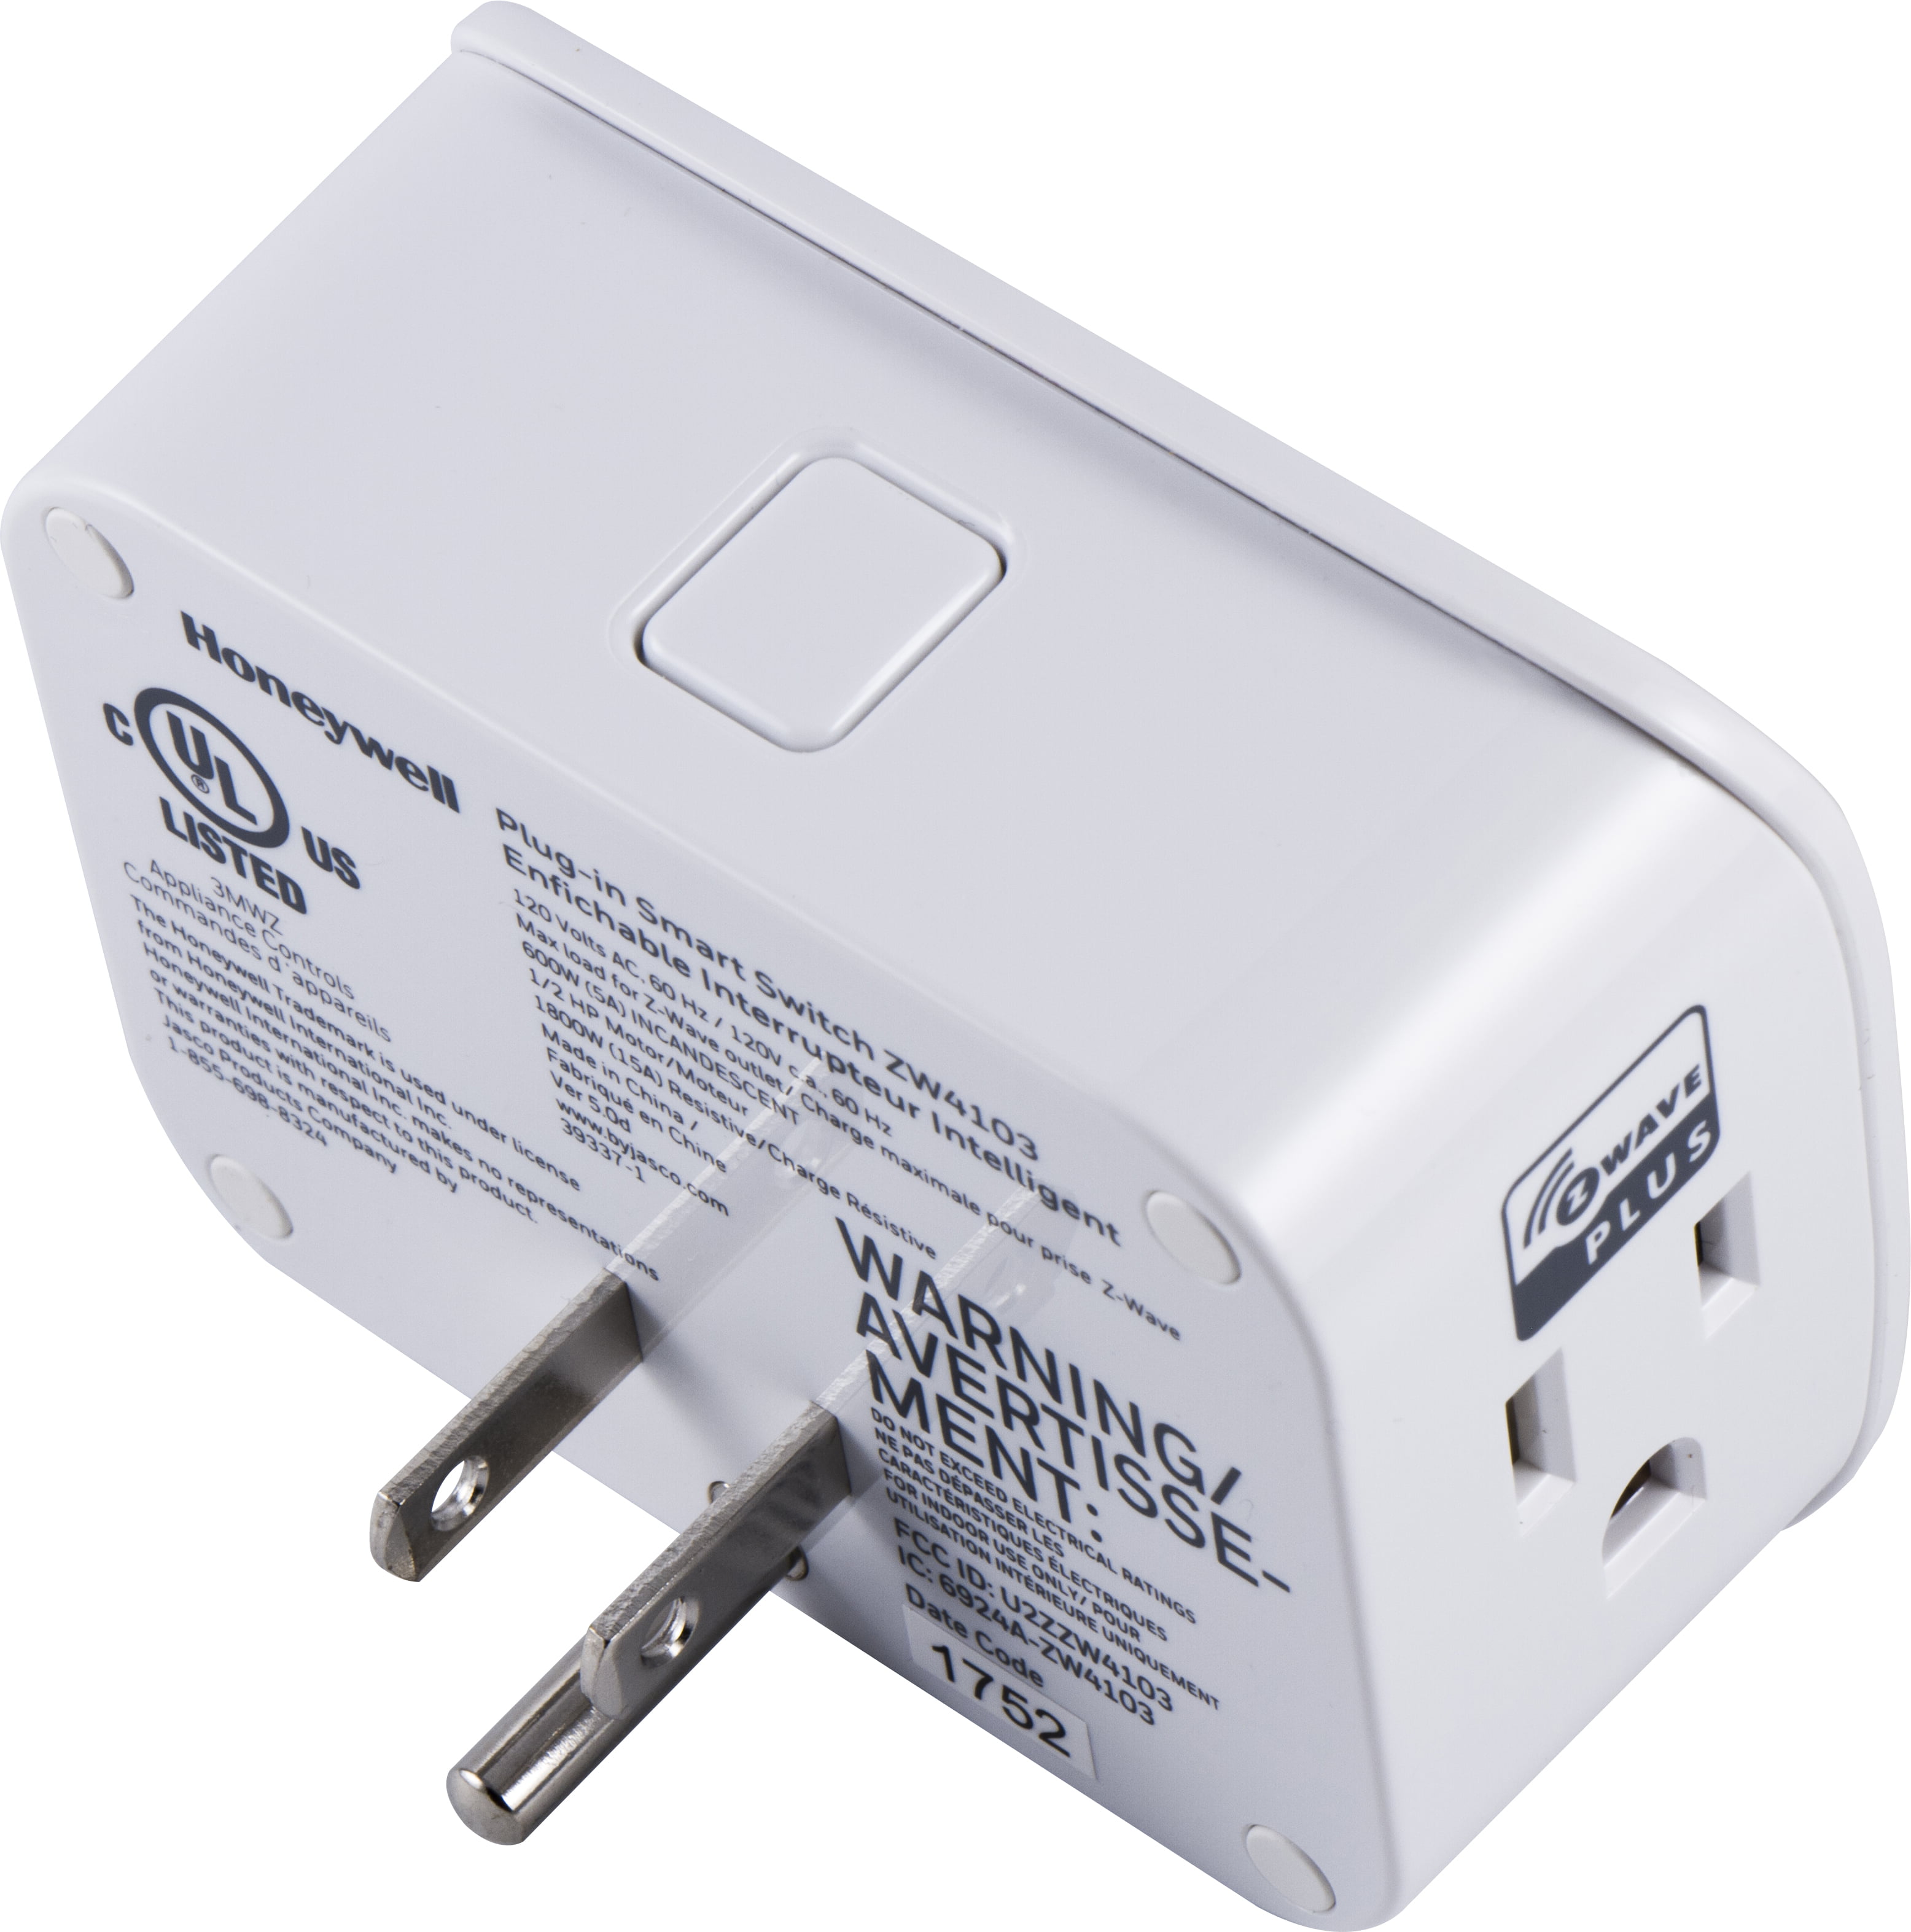 7141-50 Double Outlet ETL Wifi Smart Plug Leed's Promotional Products